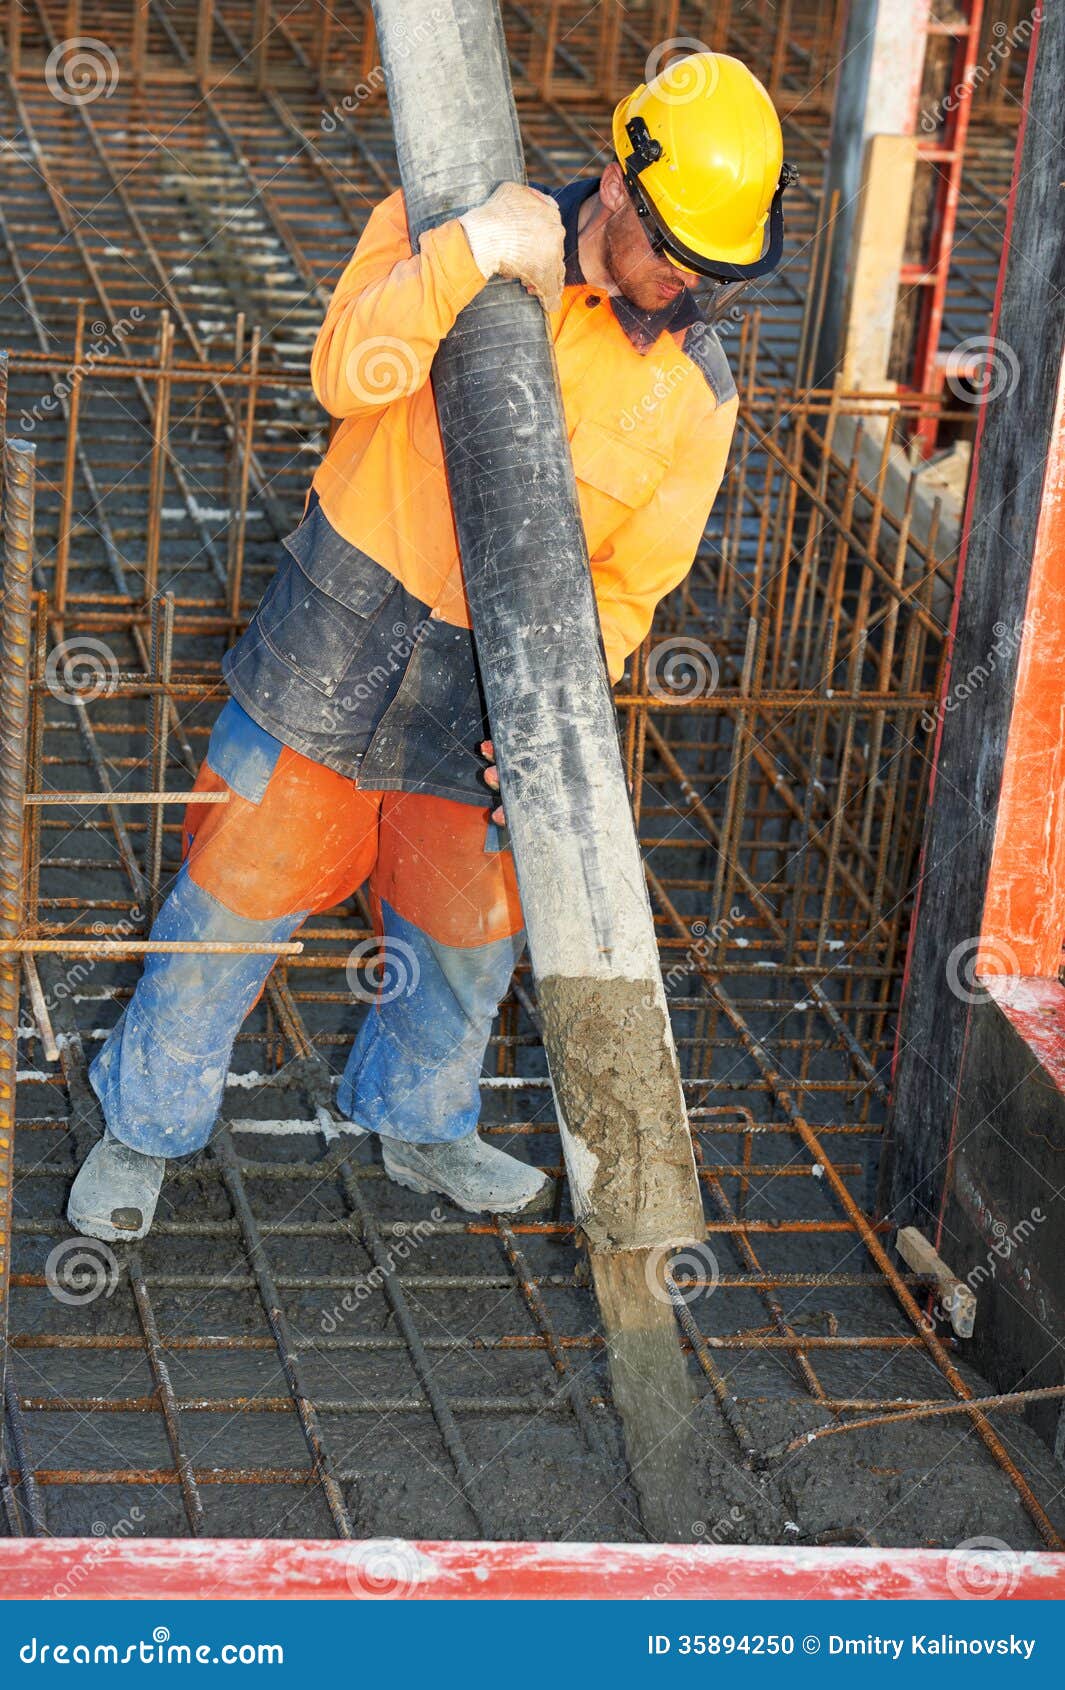 Builder Worker At Concrete Pouring Work Stock Photo - Image: 35894250